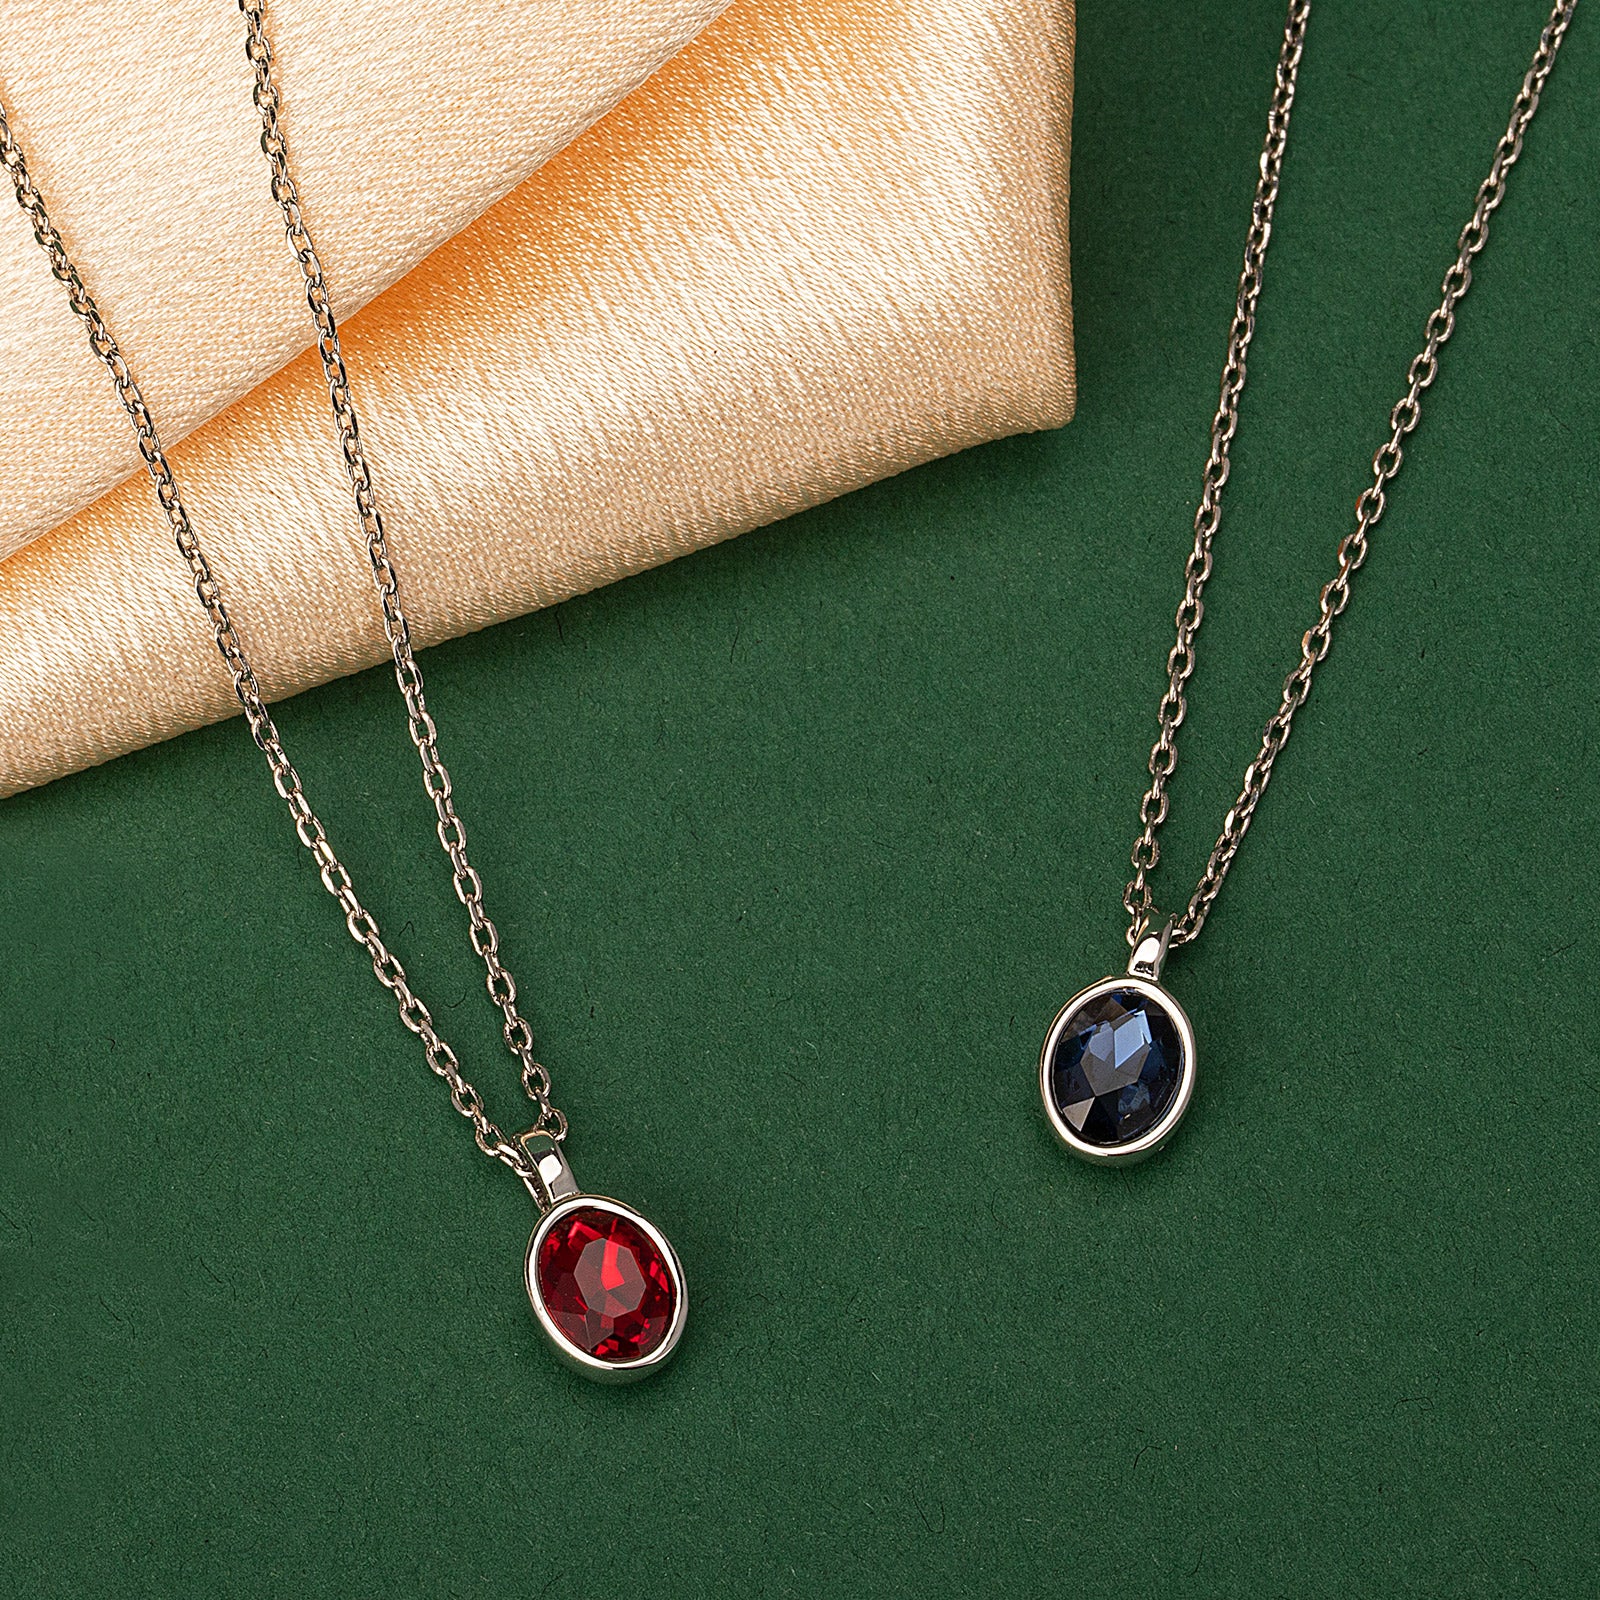 Agate Pendant Necklace with Sapphire, a chic sapphire accent to enhance your style, showcasing a stylish agate pendant in a deep blue hue, adding a touch of modern flair to your neckline.